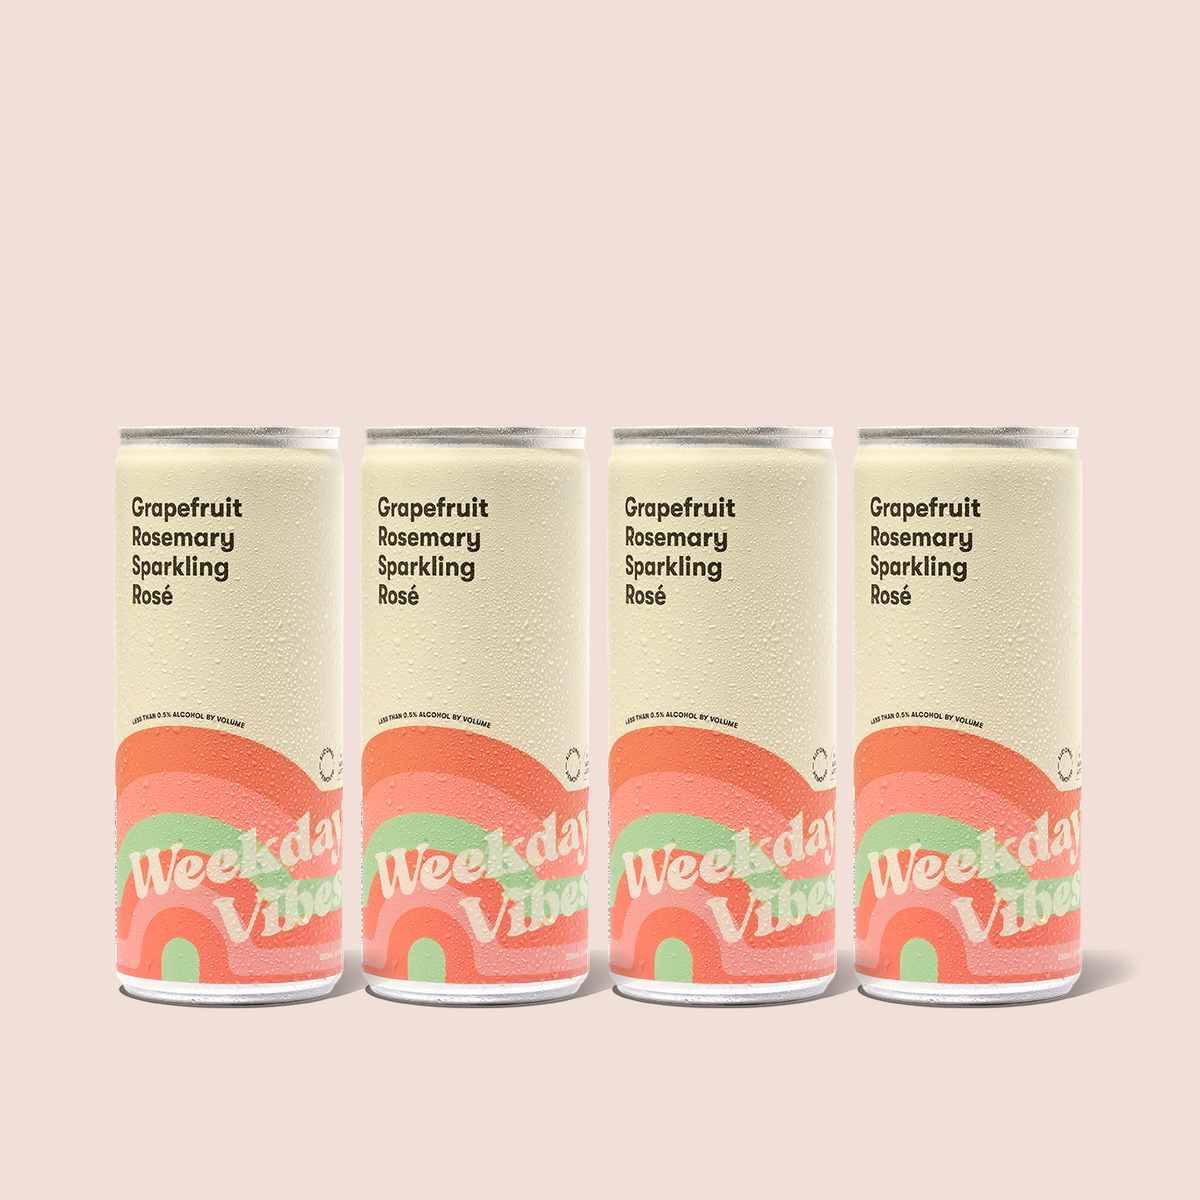 Weekday Vibes - Rosemary Grapefruit Sparkling Rosé - 4-Pack